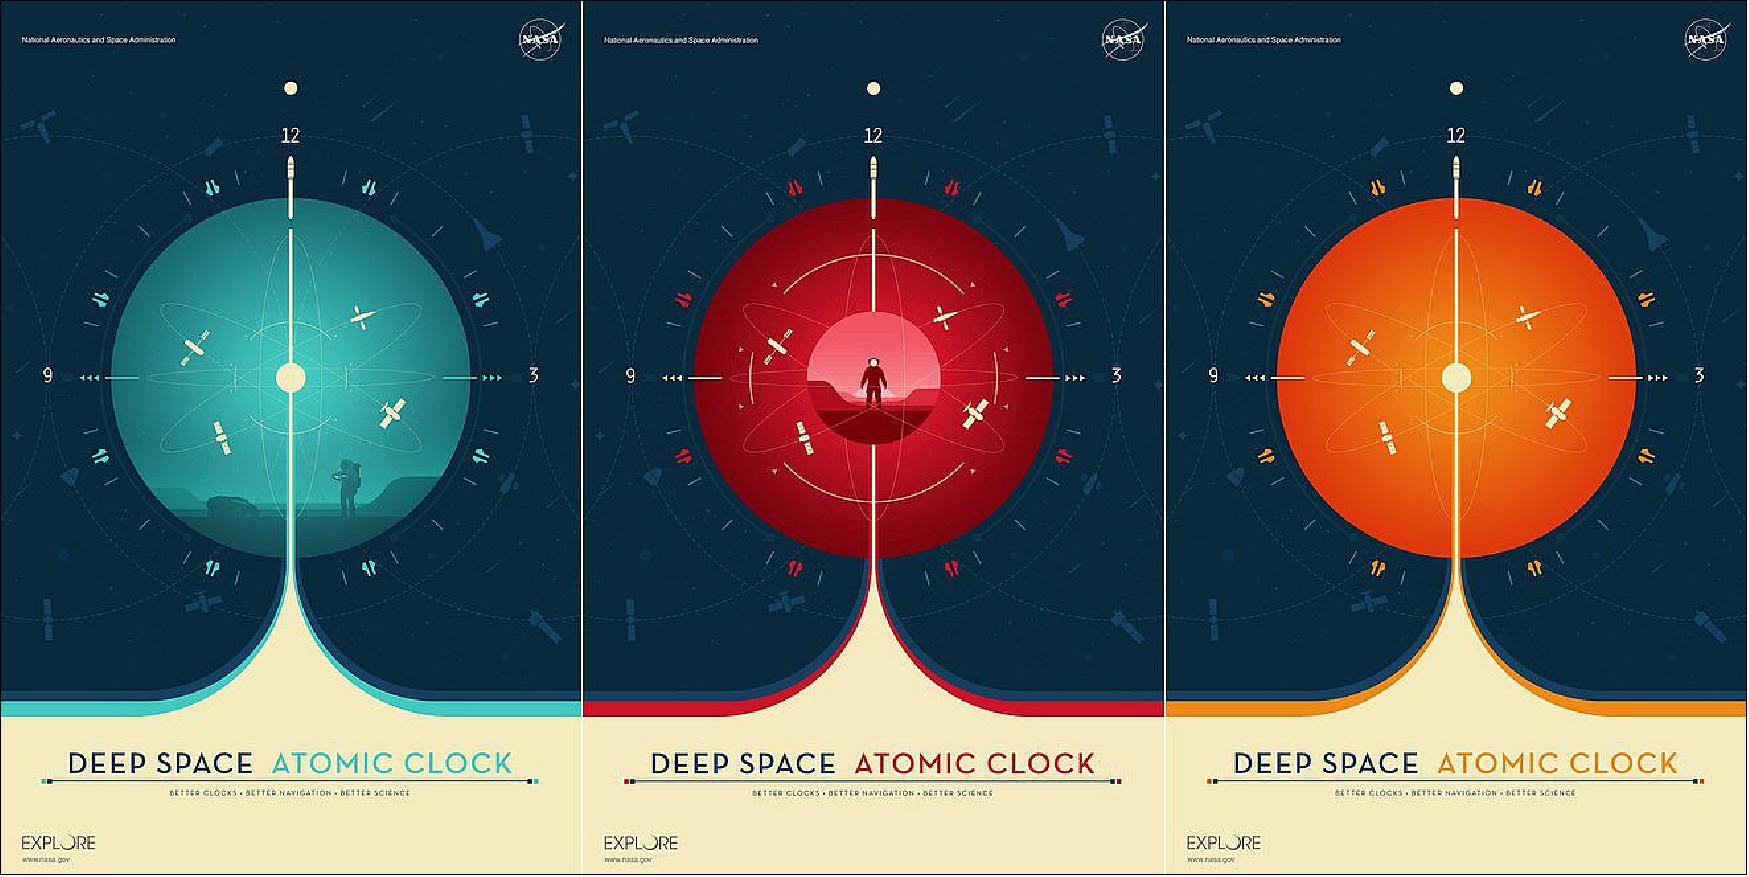 Figure 13: Three eye-catching posters featuring the Deep Space Atomic Clock and how future versions of the tech demo may be used by spacecraft and astronauts are available for download here (image credit: NASA/JPL-Caltech)